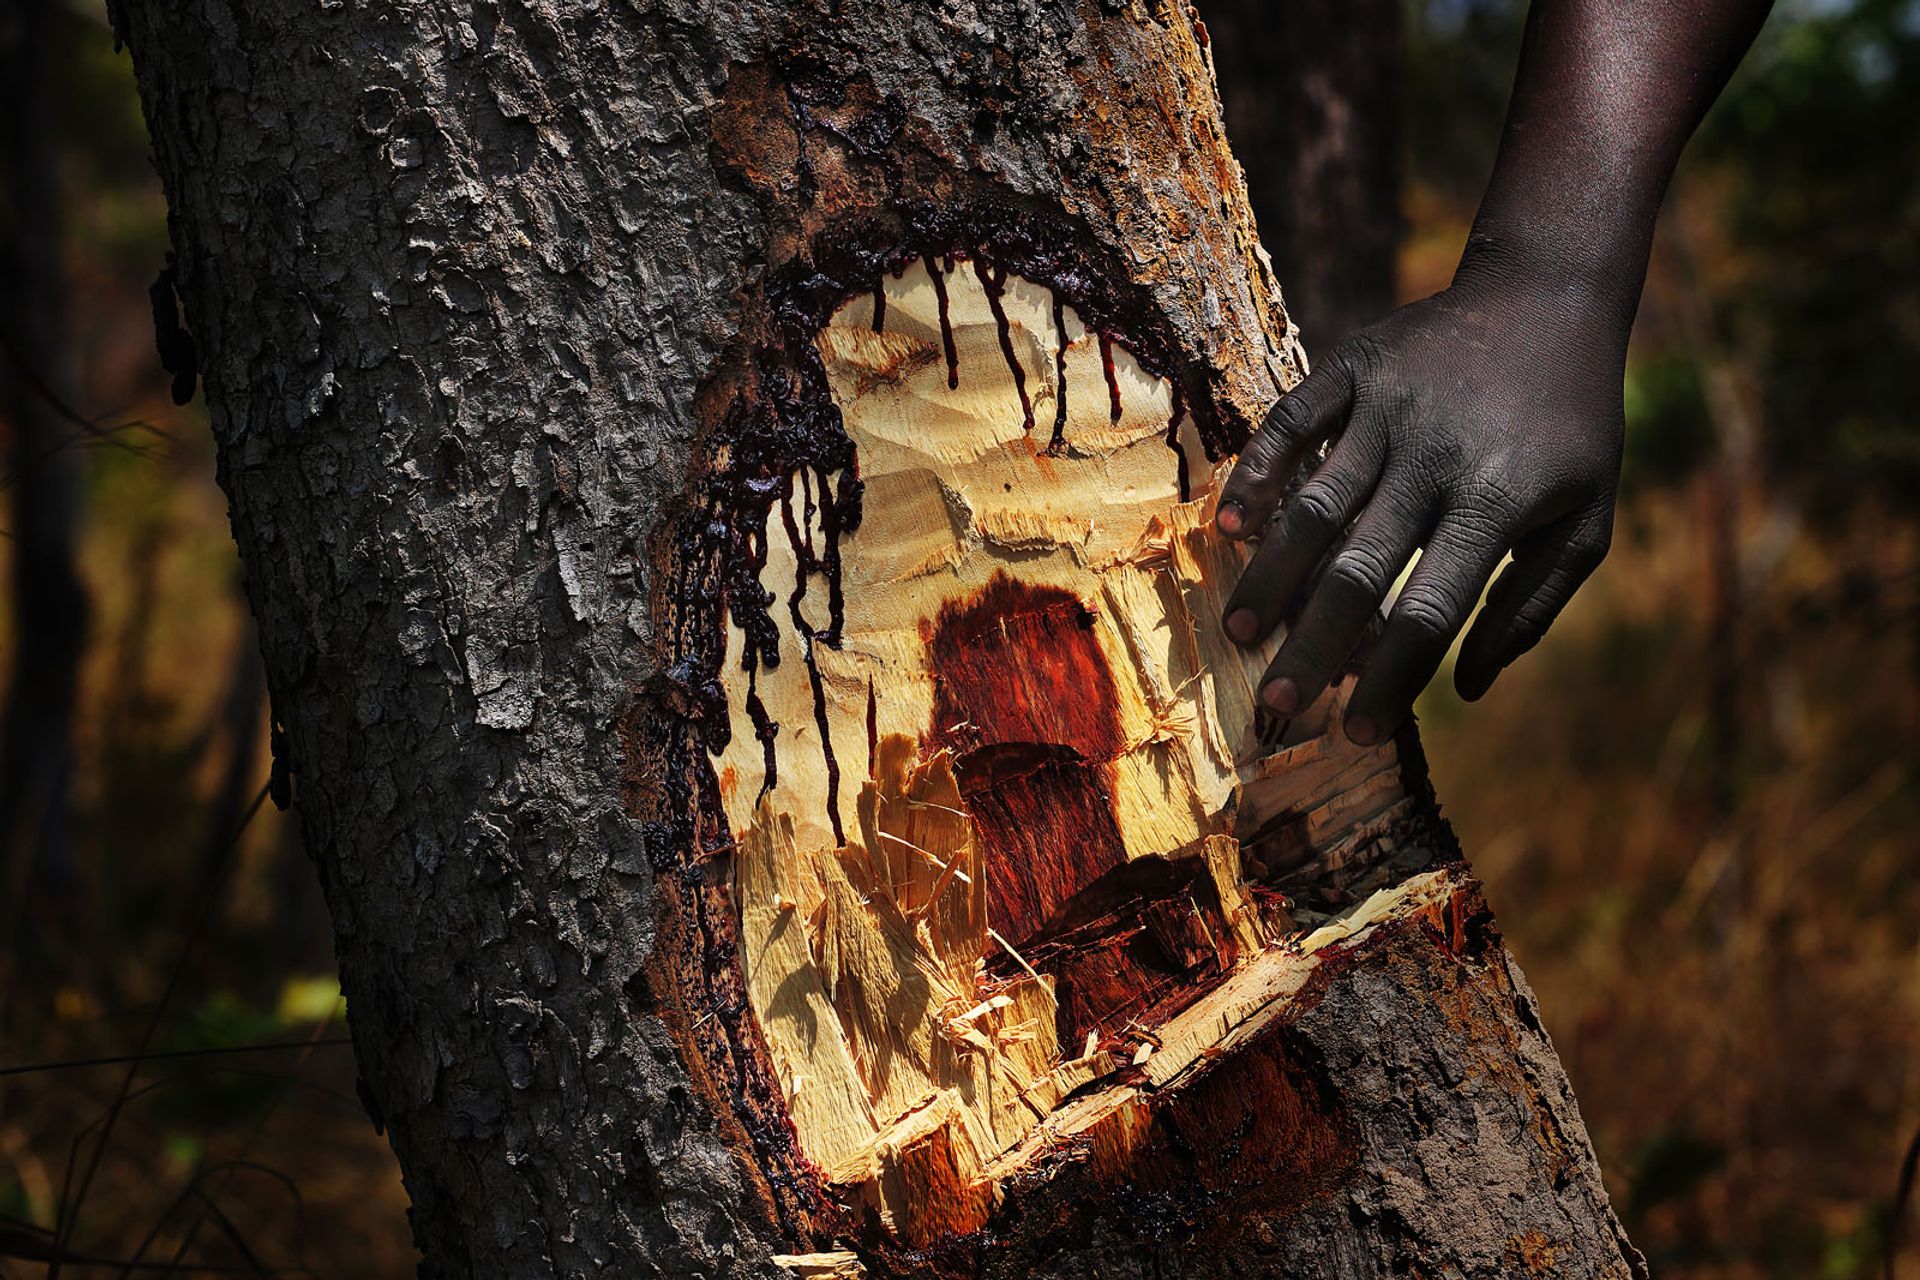 One of Lu Guang’s images of bloodwood bleeding after being cut in the Democratic Republic of the Congo Lu Guang